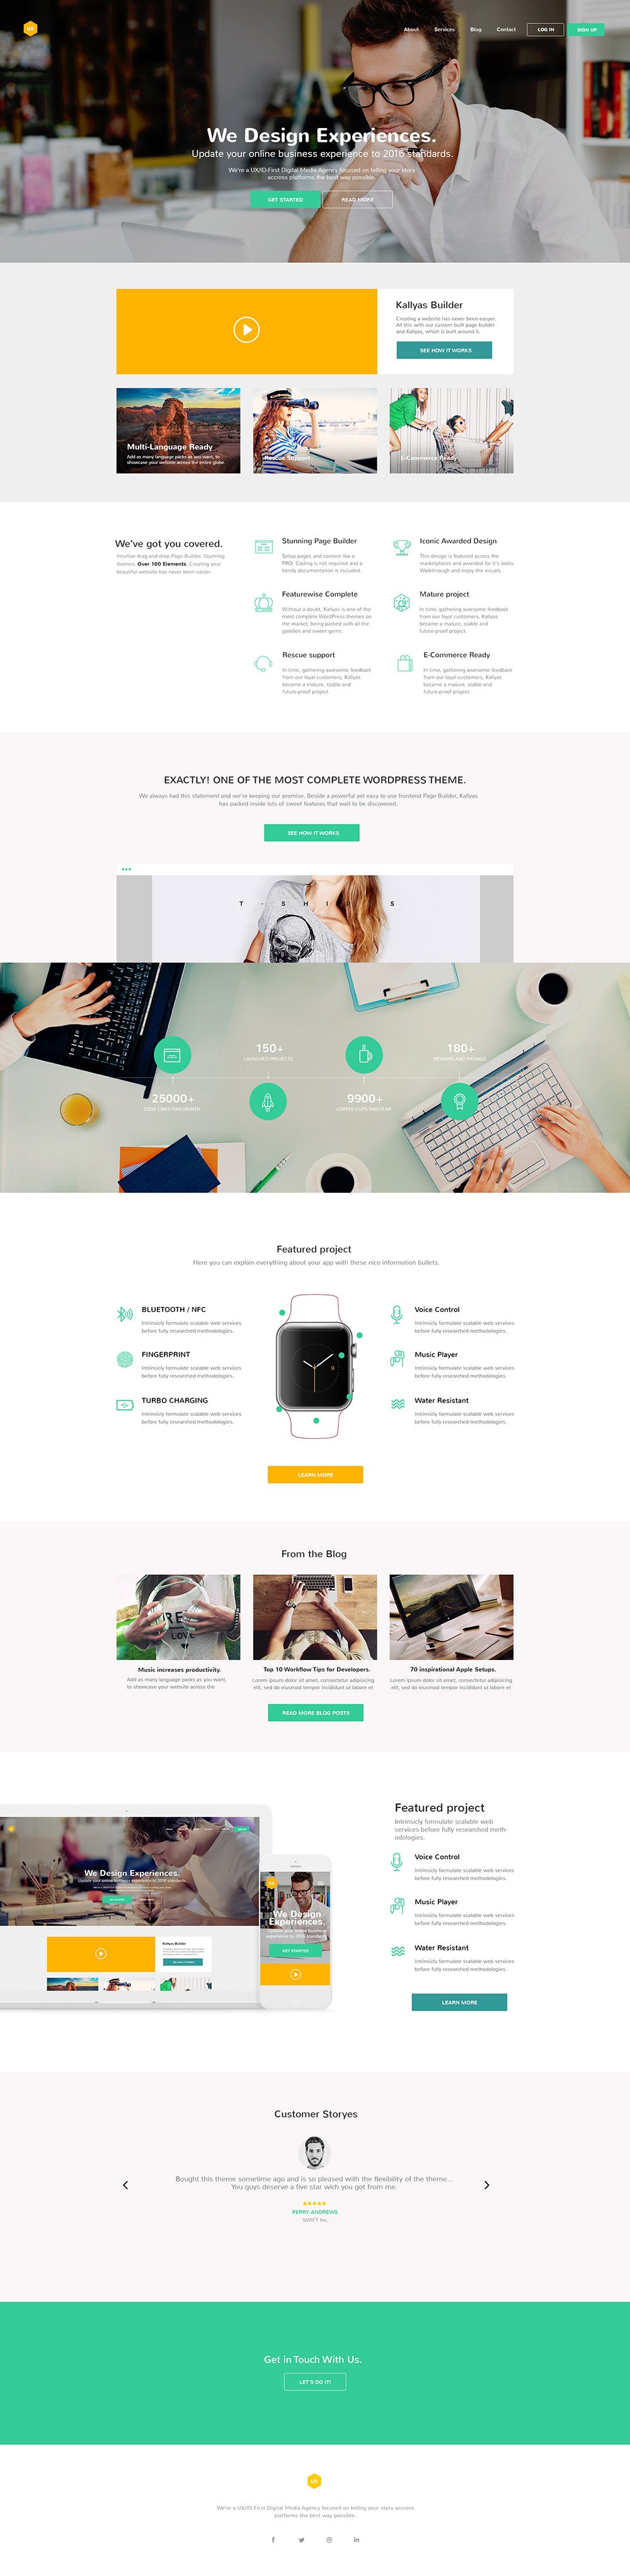 Business - Free PSD Template